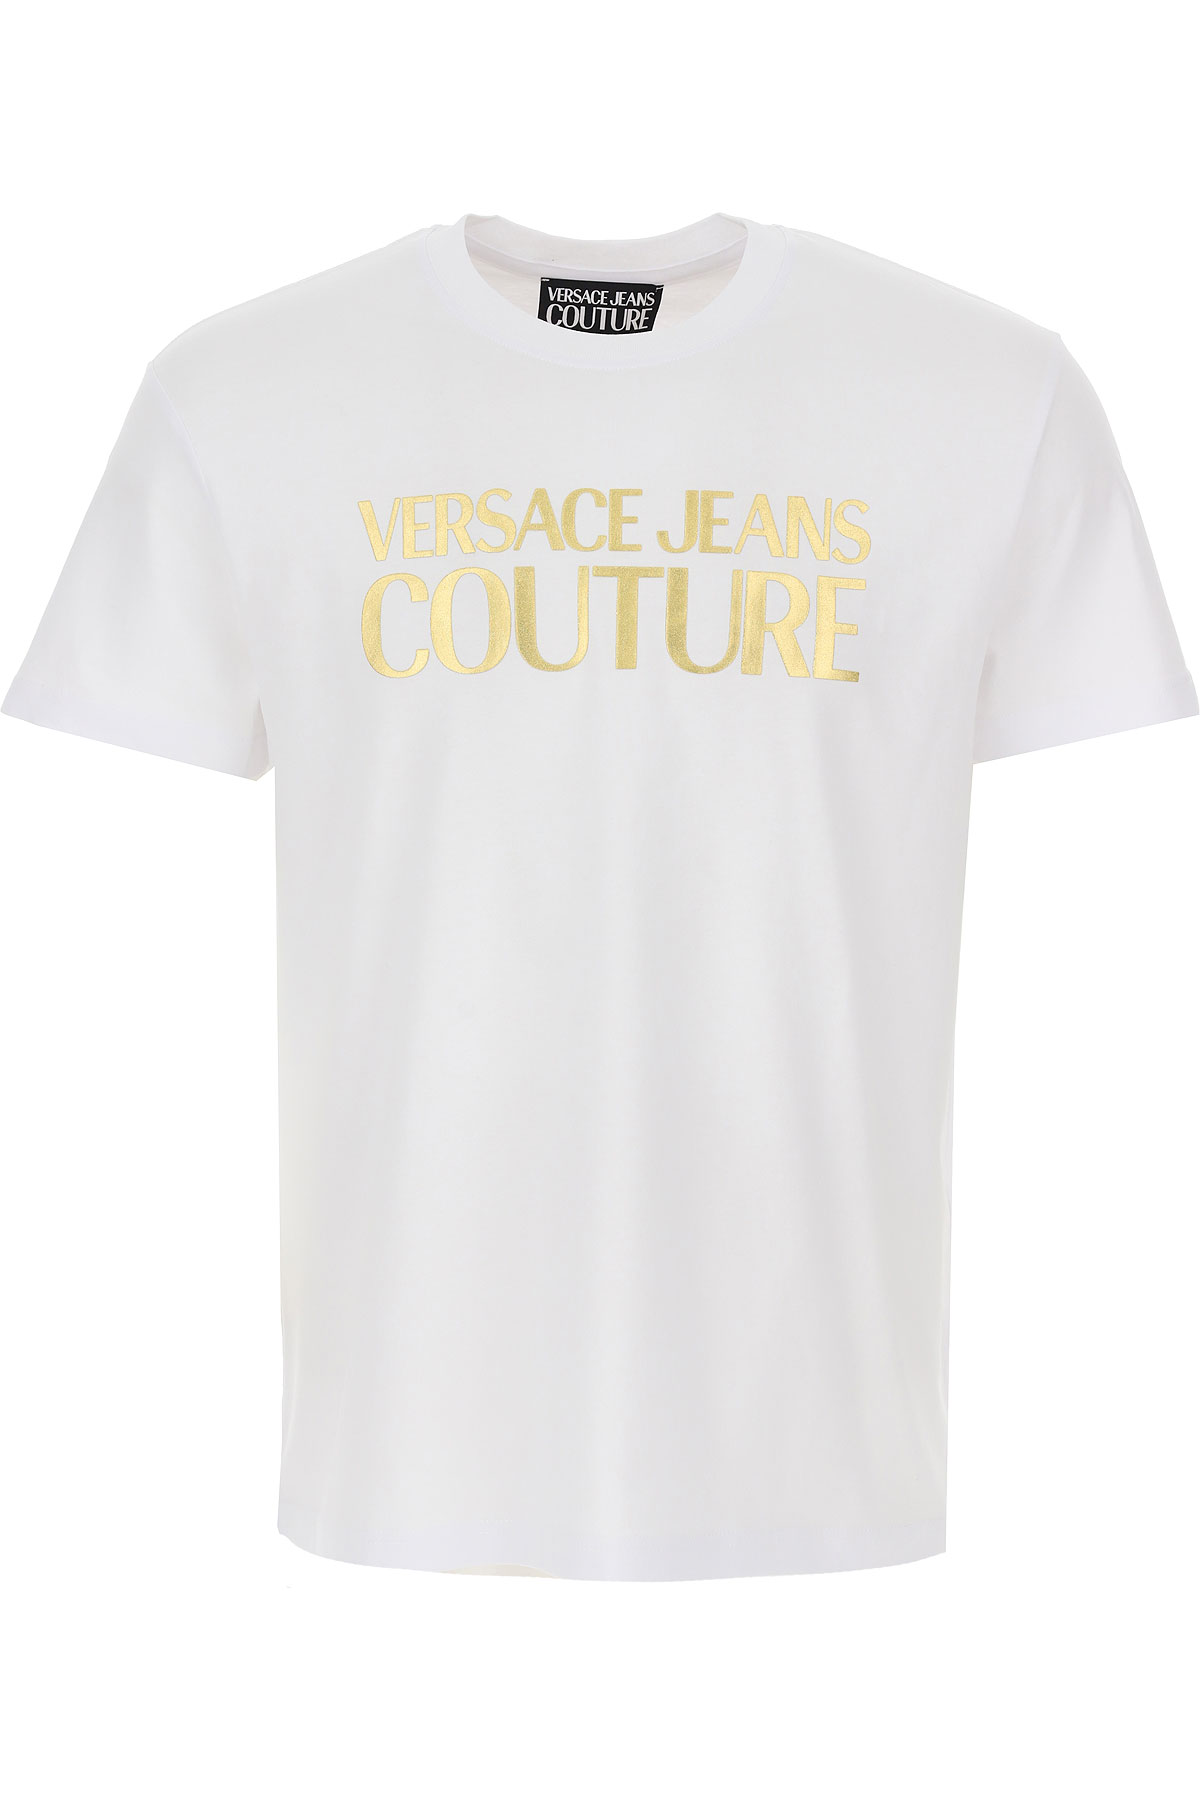 Mens Clothing Versace Jeans Couture , Style code: 72gaht01-cj00t-g03